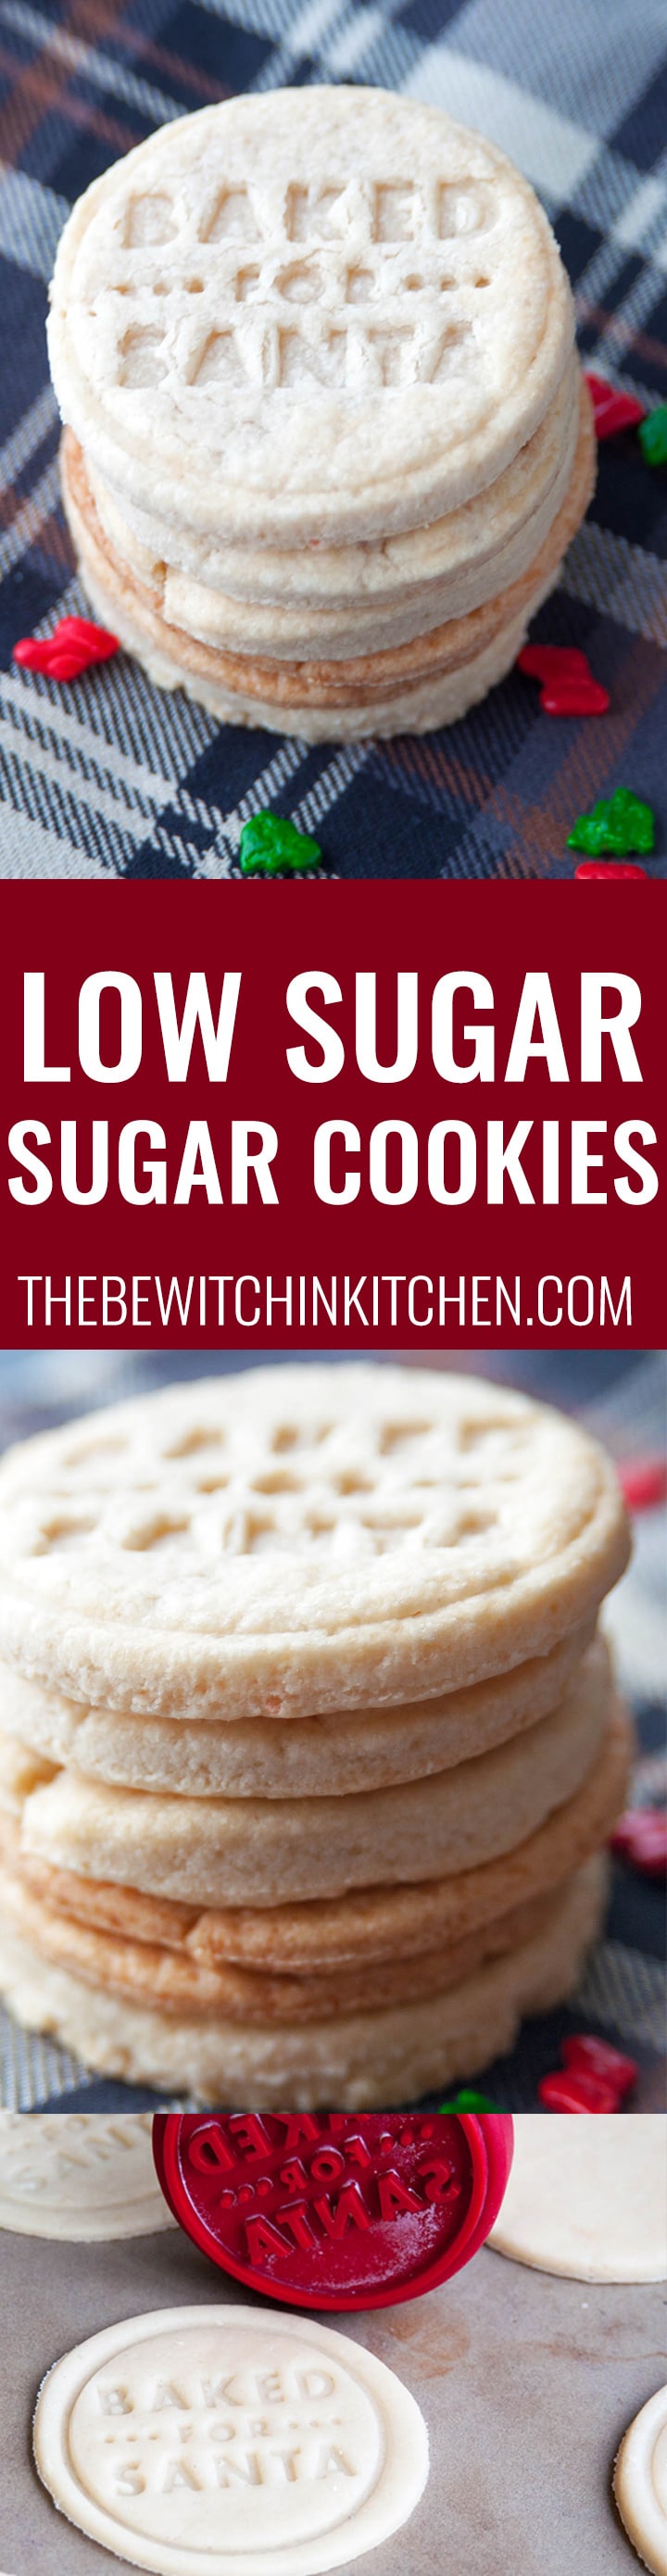 Low Sugar Cookies Recipe | The Bewitchin' Kitchen